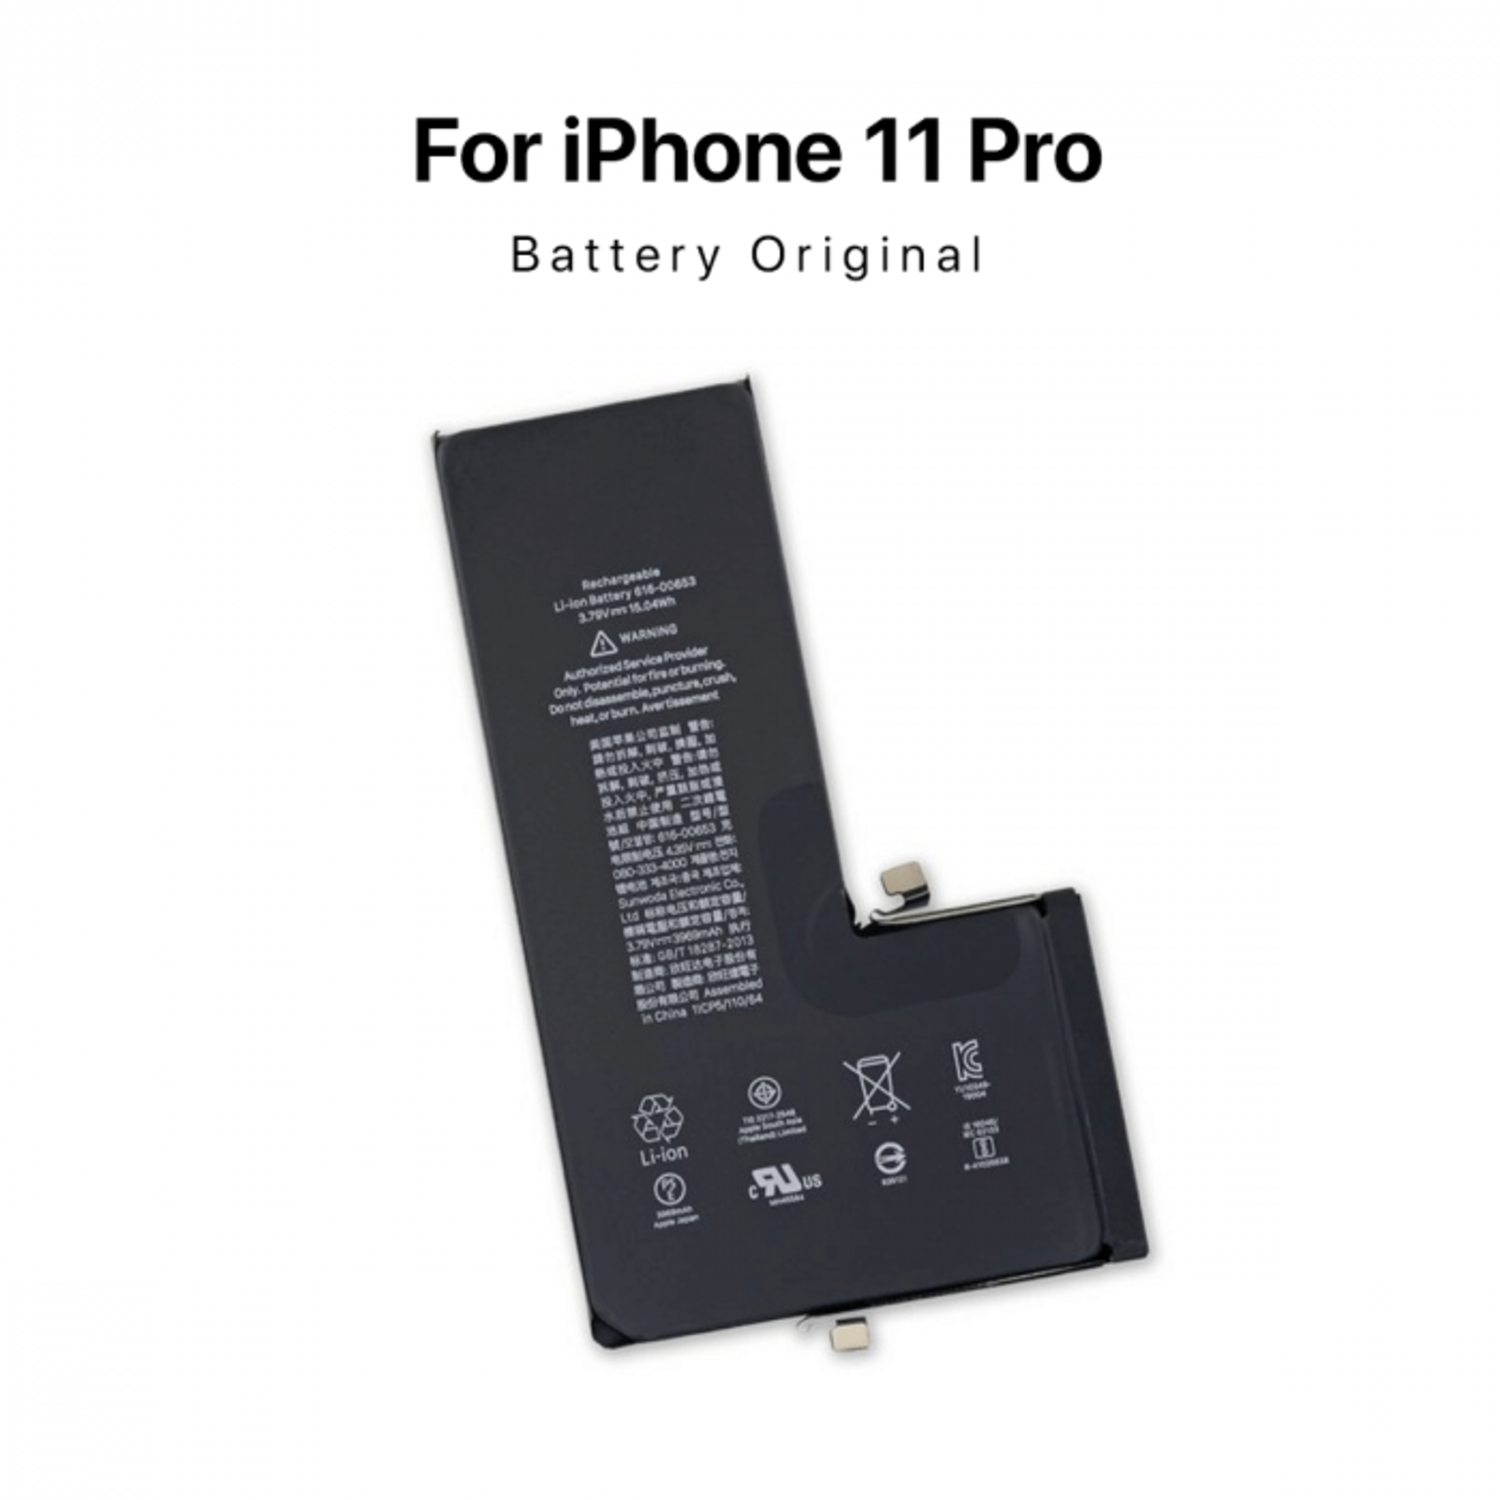 Batterie iPhone 11 Pro Max